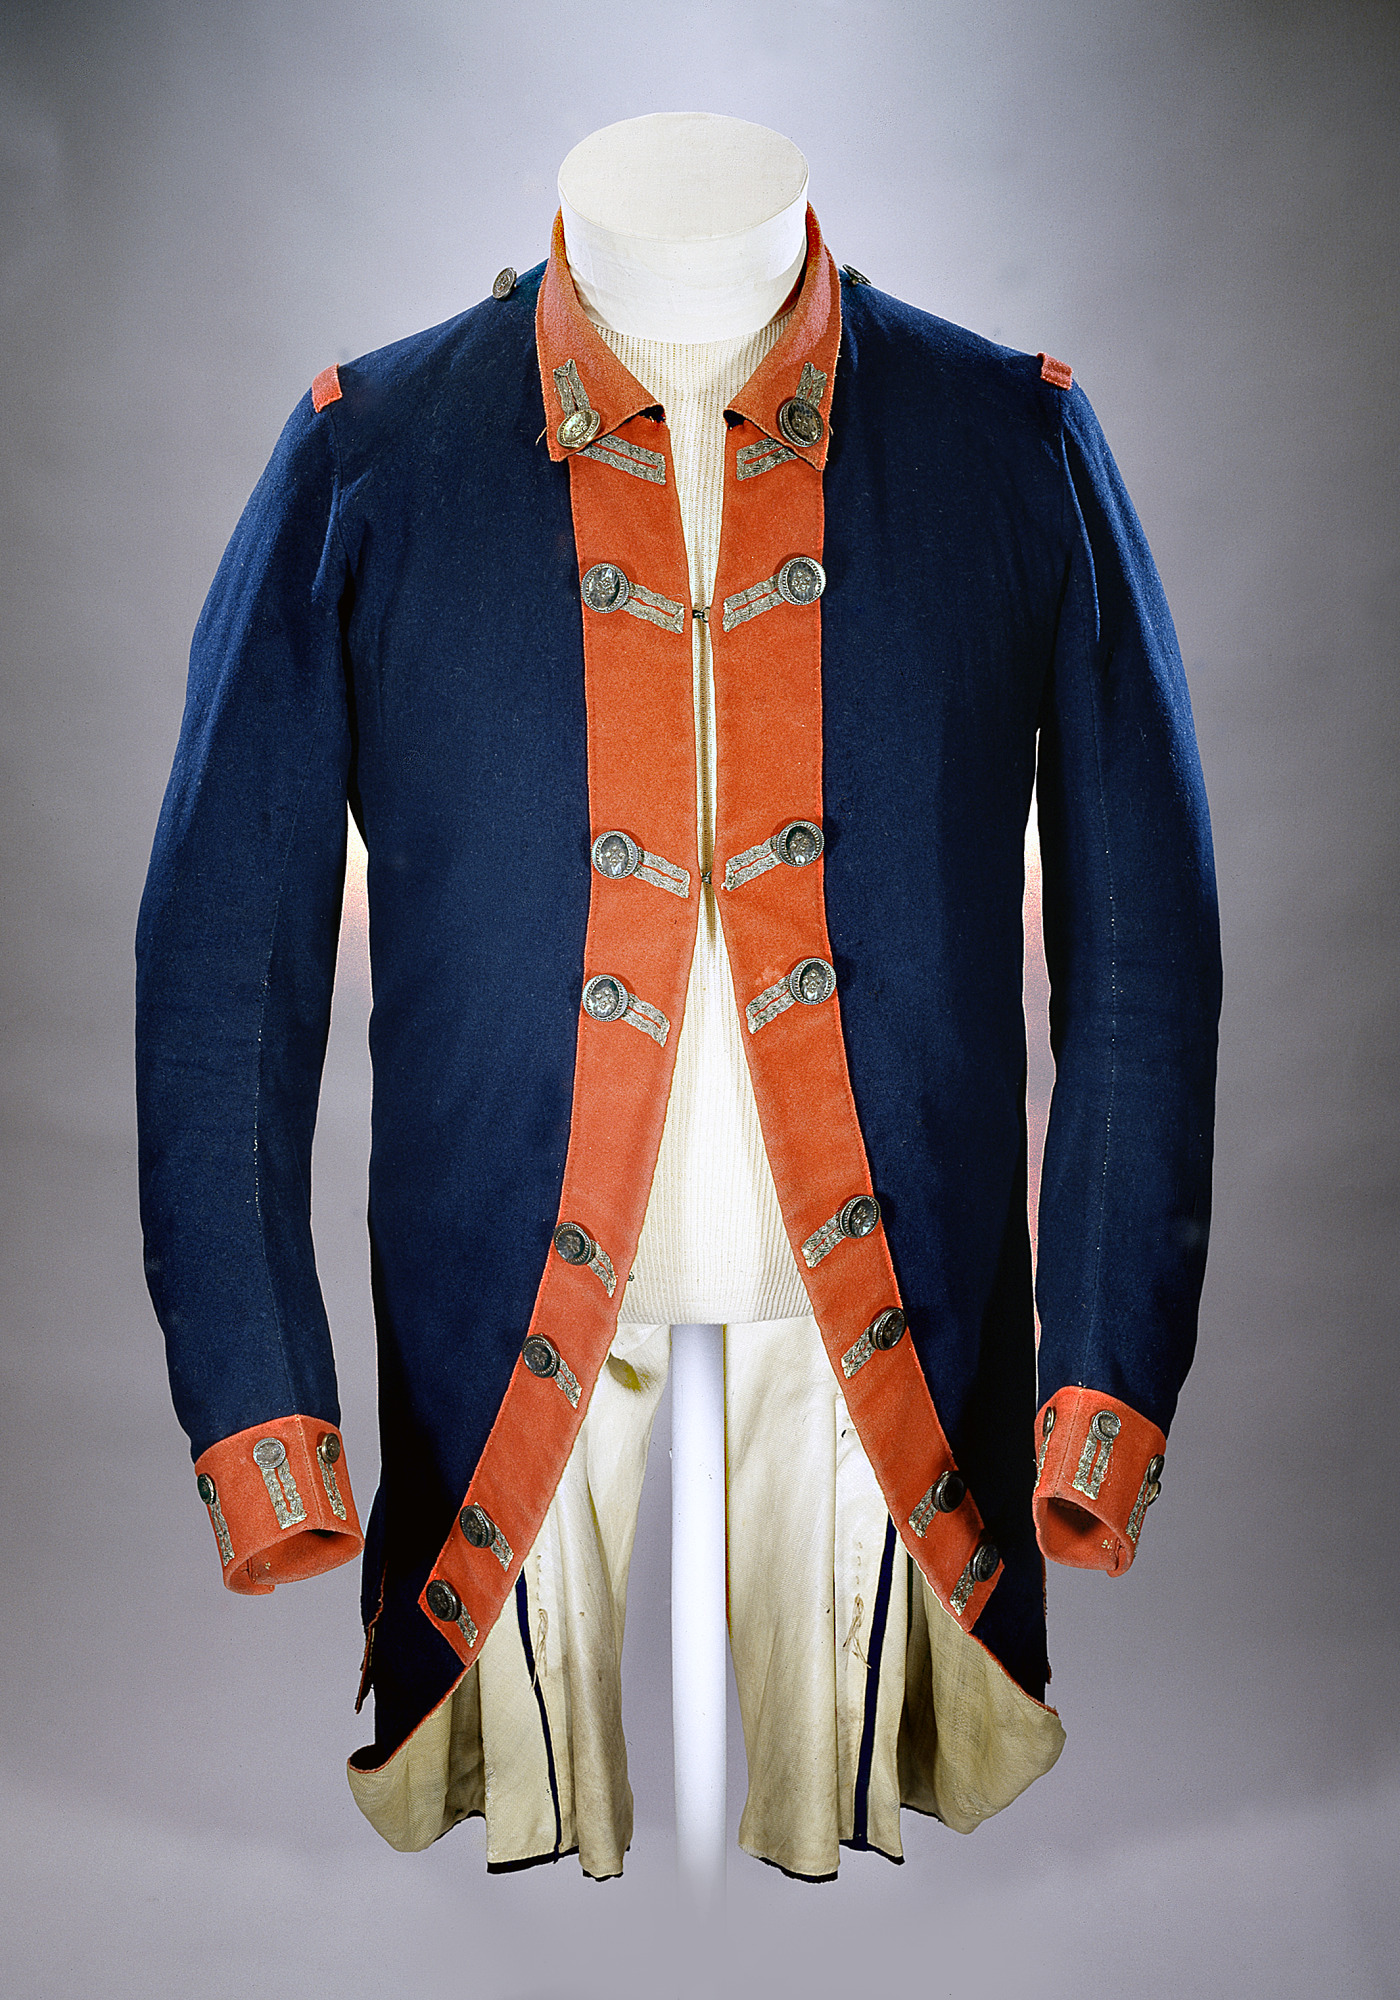 A typical looking Continental uniform jacket. It has gold edging along the button holes and cuffs.